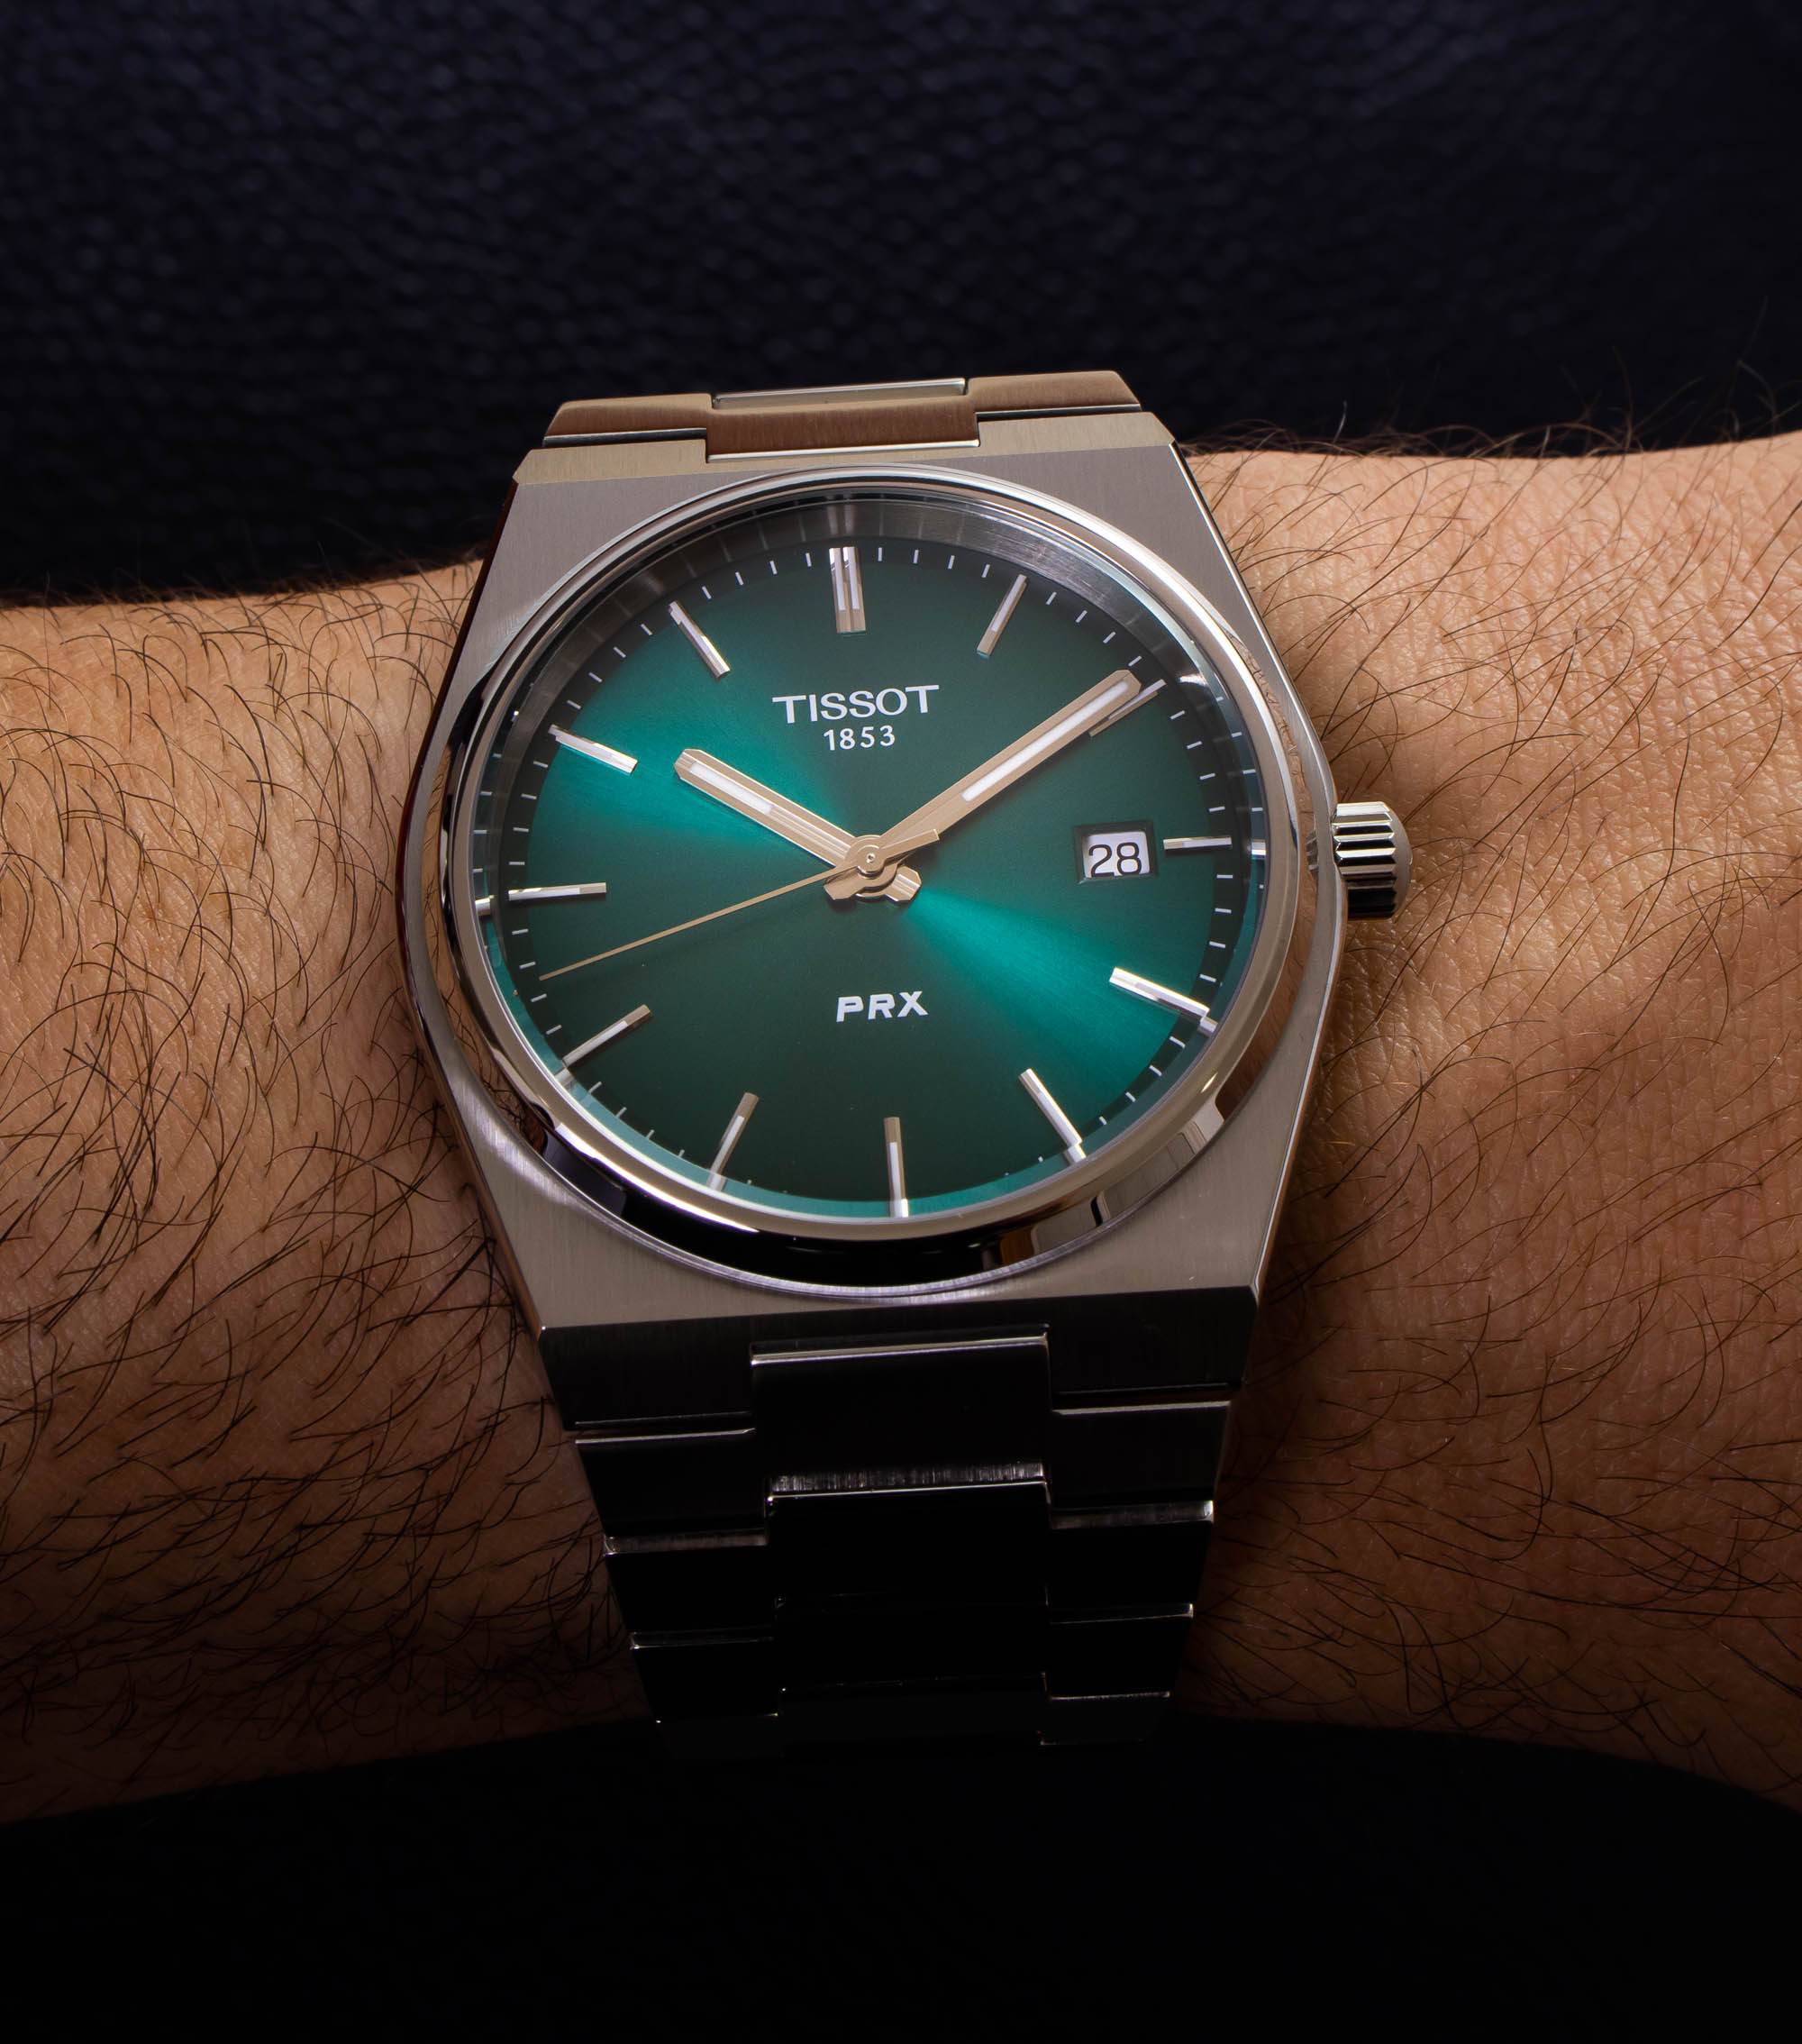 The NEW Tissot PRX Green ALMOST Has It All 